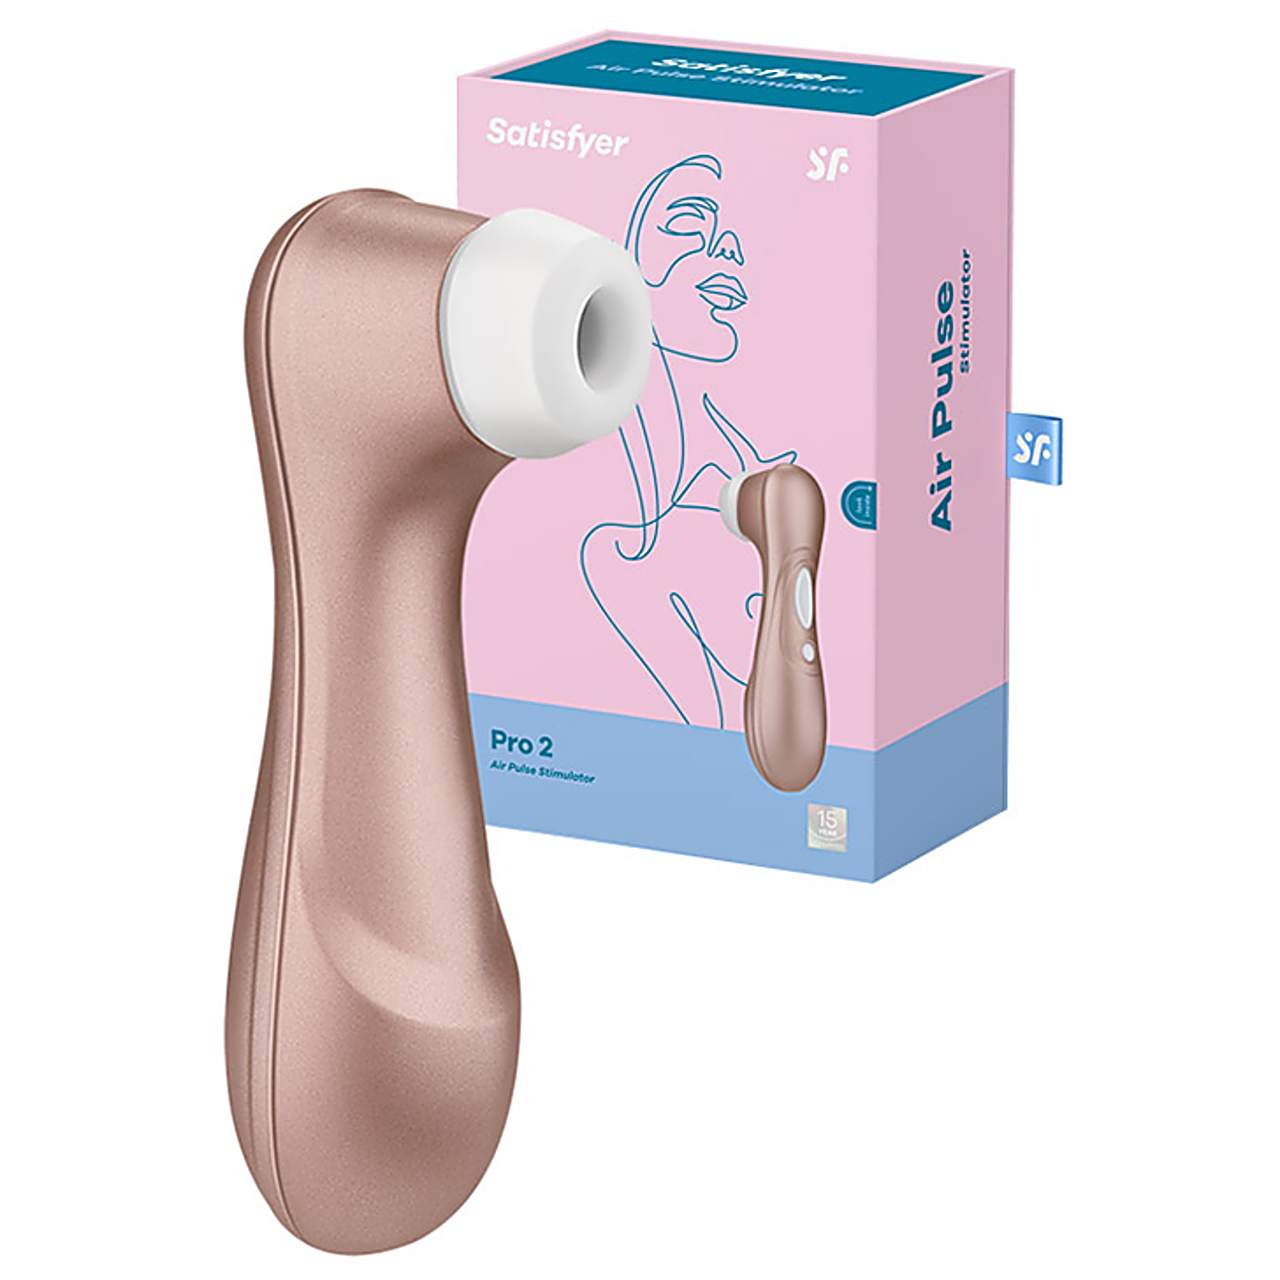 These Clit-Sucking Vibrators and Suction Vibrators Are Almost Better Than the Real Thing 